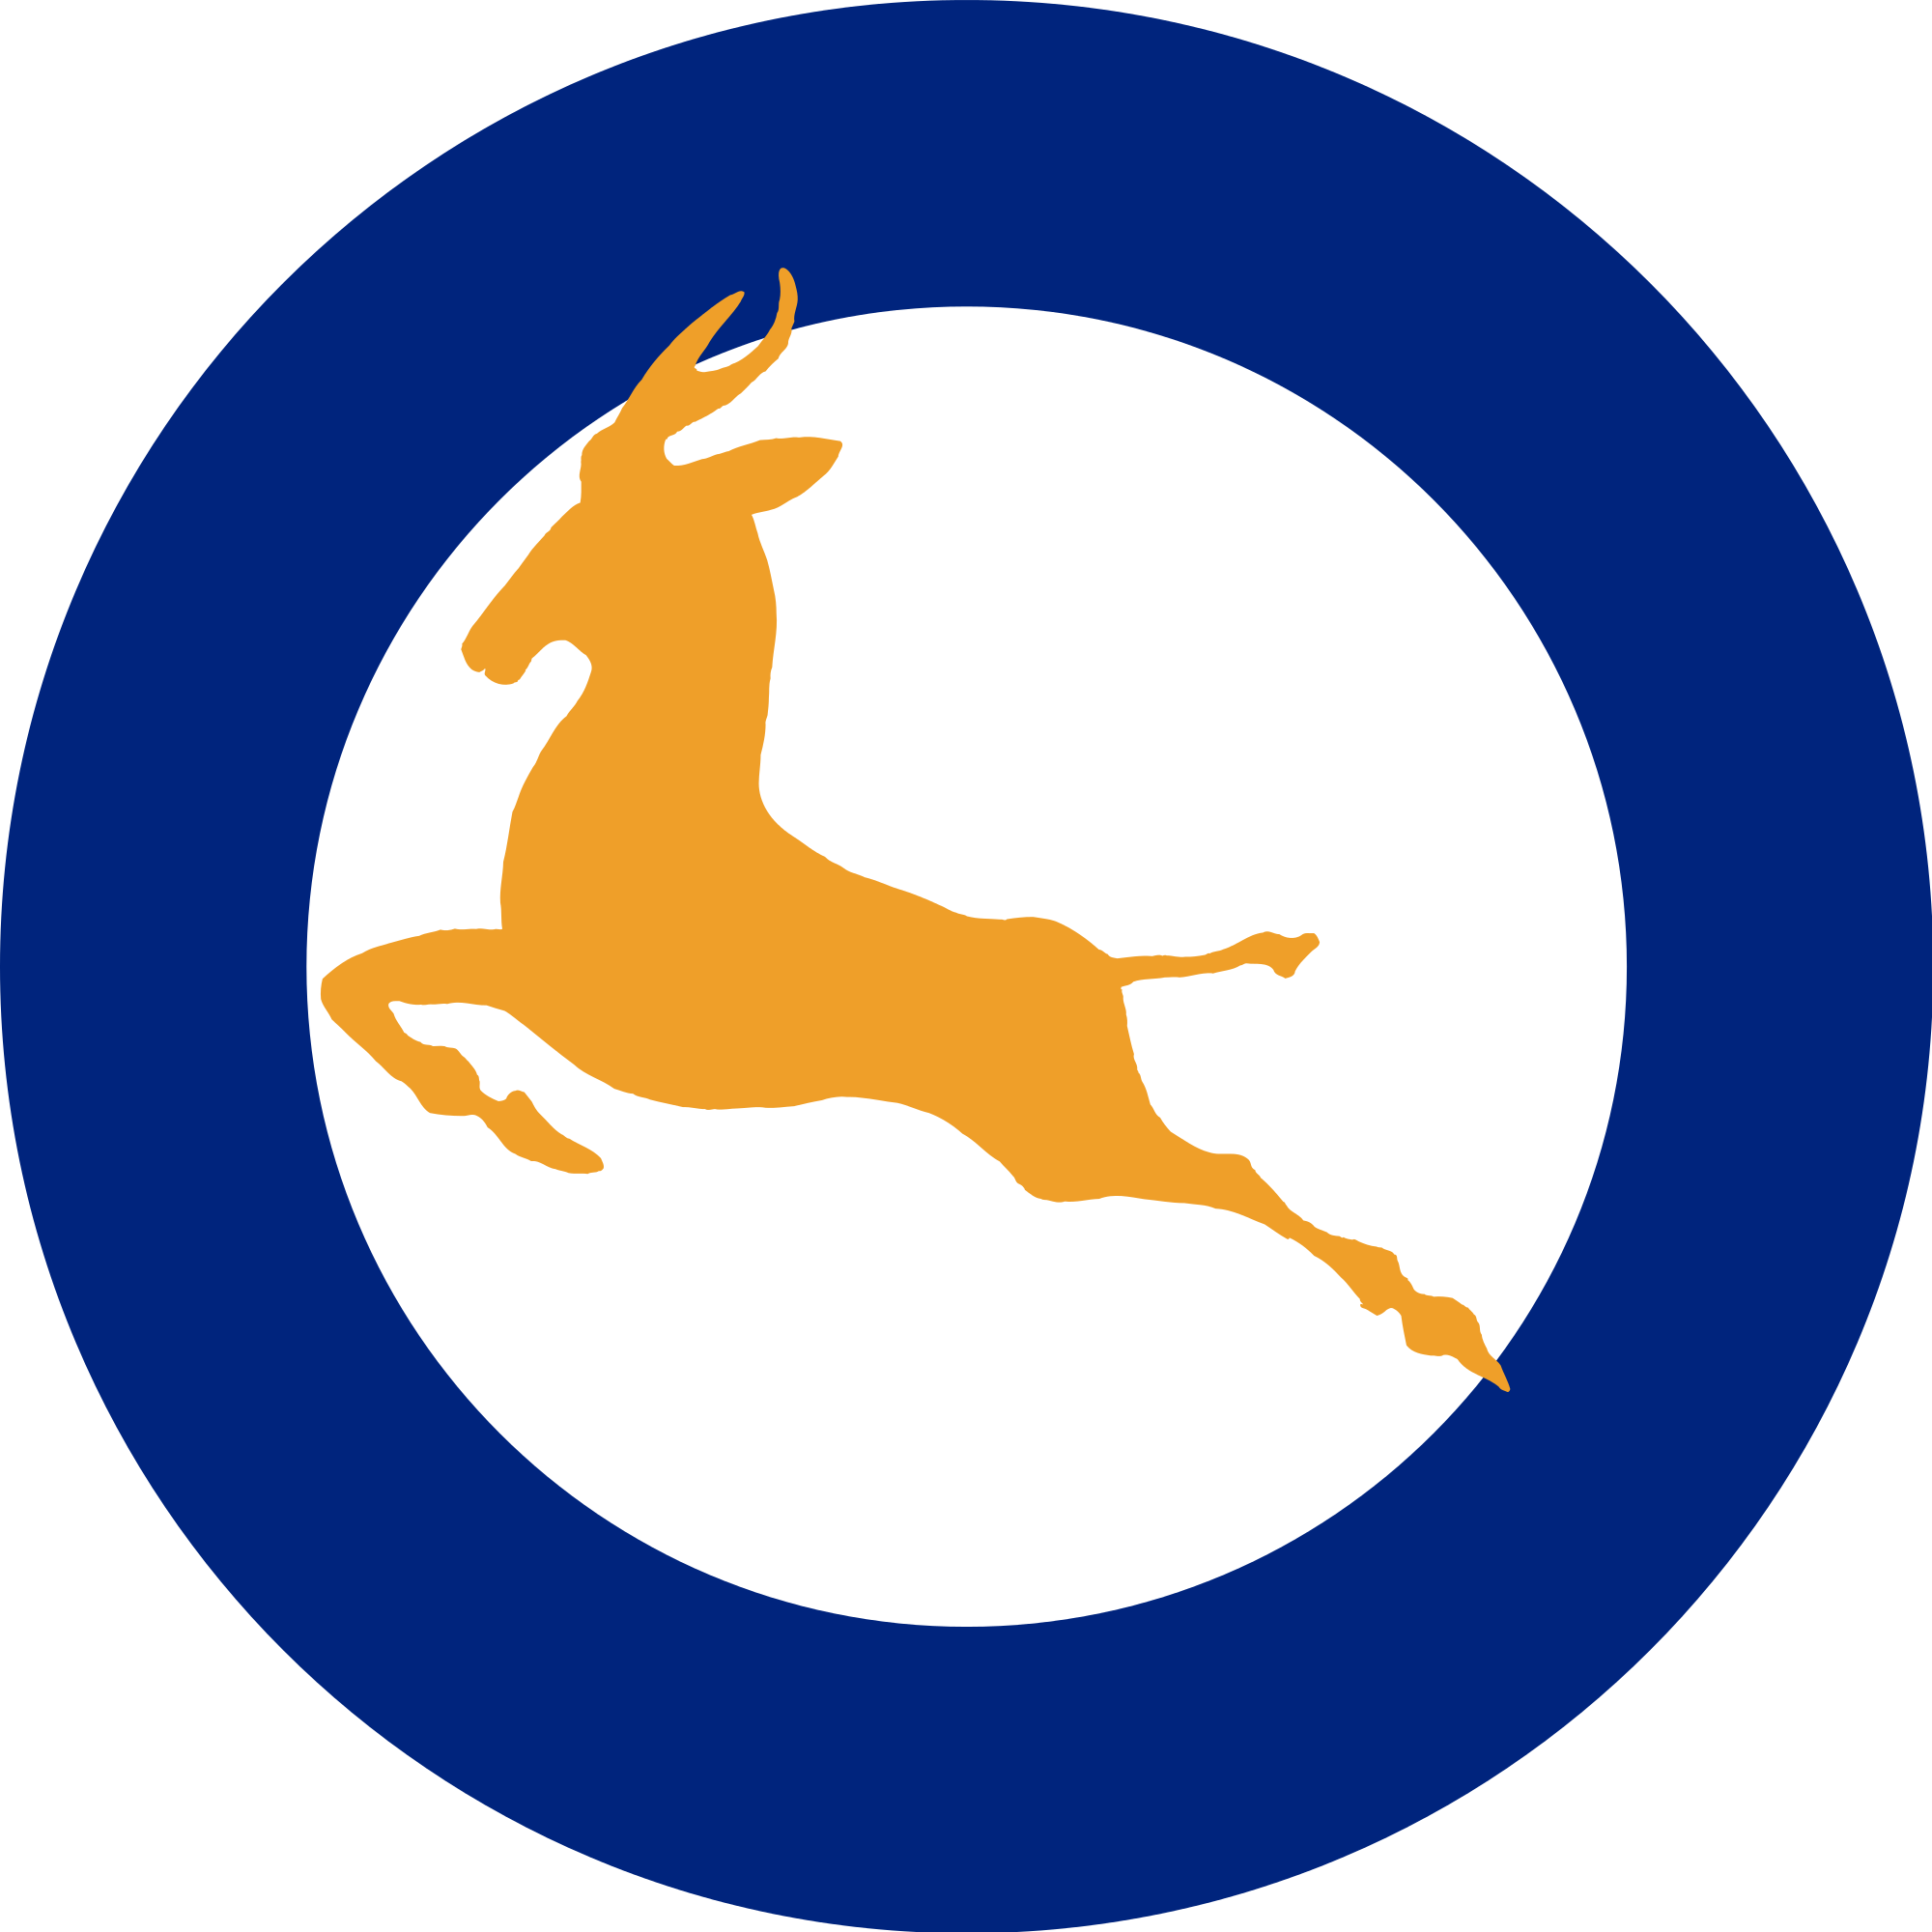 South African Air Force Roundel 1947-1958 - Bond Street Station (2000x2000)